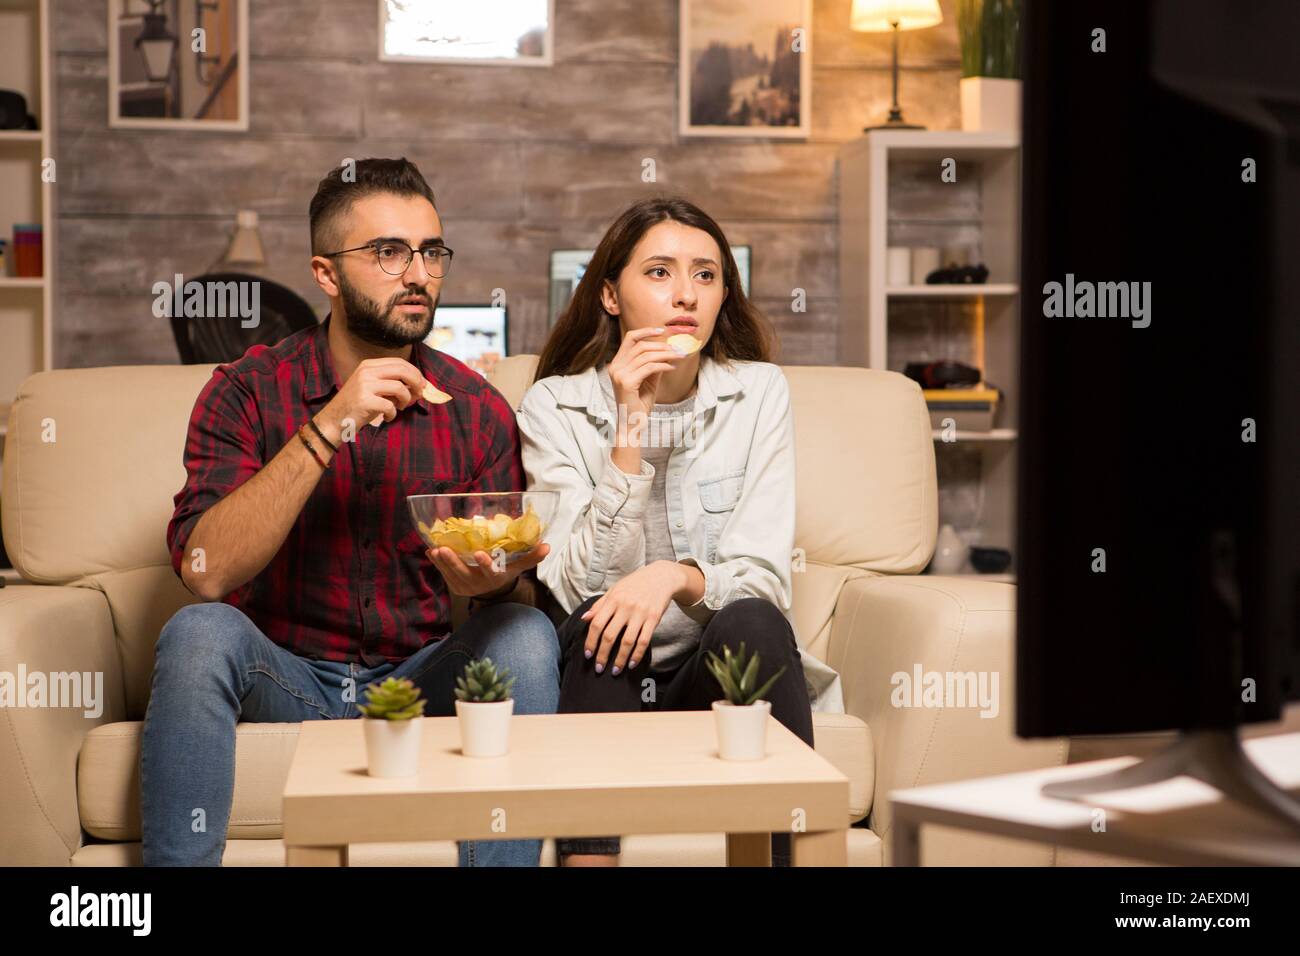 Beautiful young couple looking worried at tv while watching a movie. Couple eating chips sitting on sofa. Stock Photo